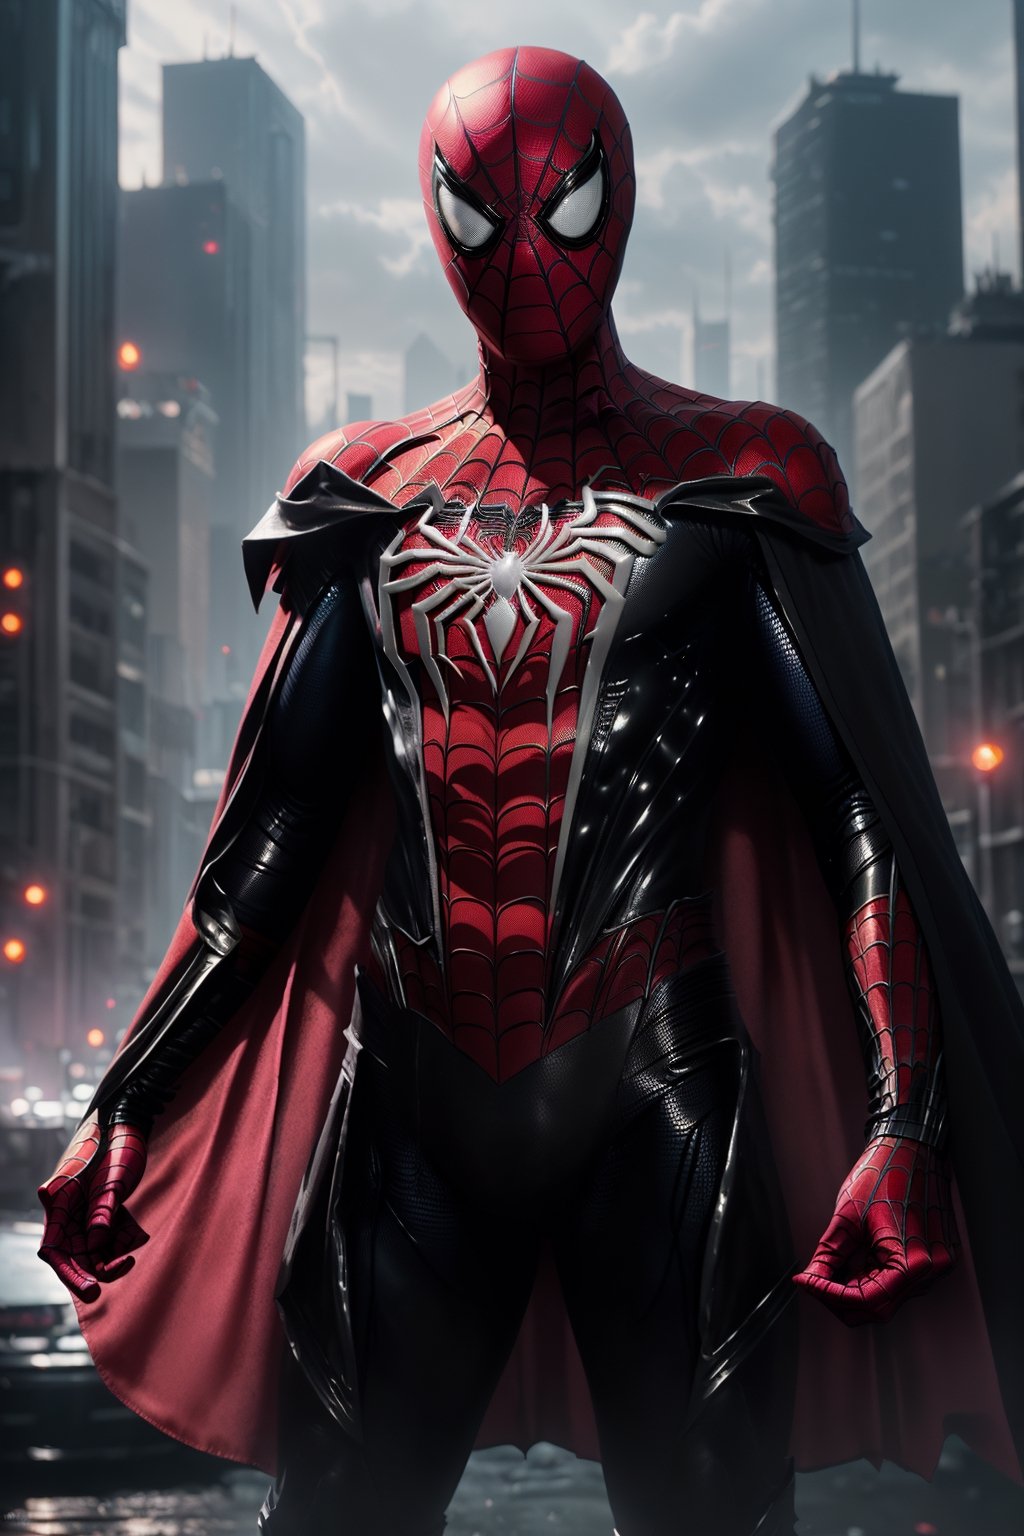 (Breathtaking 8K concept art), (Spiderman in a sleek Pink and Black armored suit, unmasked, with a flowing black cape:1.3), Against a detailed night cityscape, bathed in natural volumetric lighting, reminiscent of artistic visionaries like Greg Rutkowski, (A masterpiece trending on ArtStation:1.3).